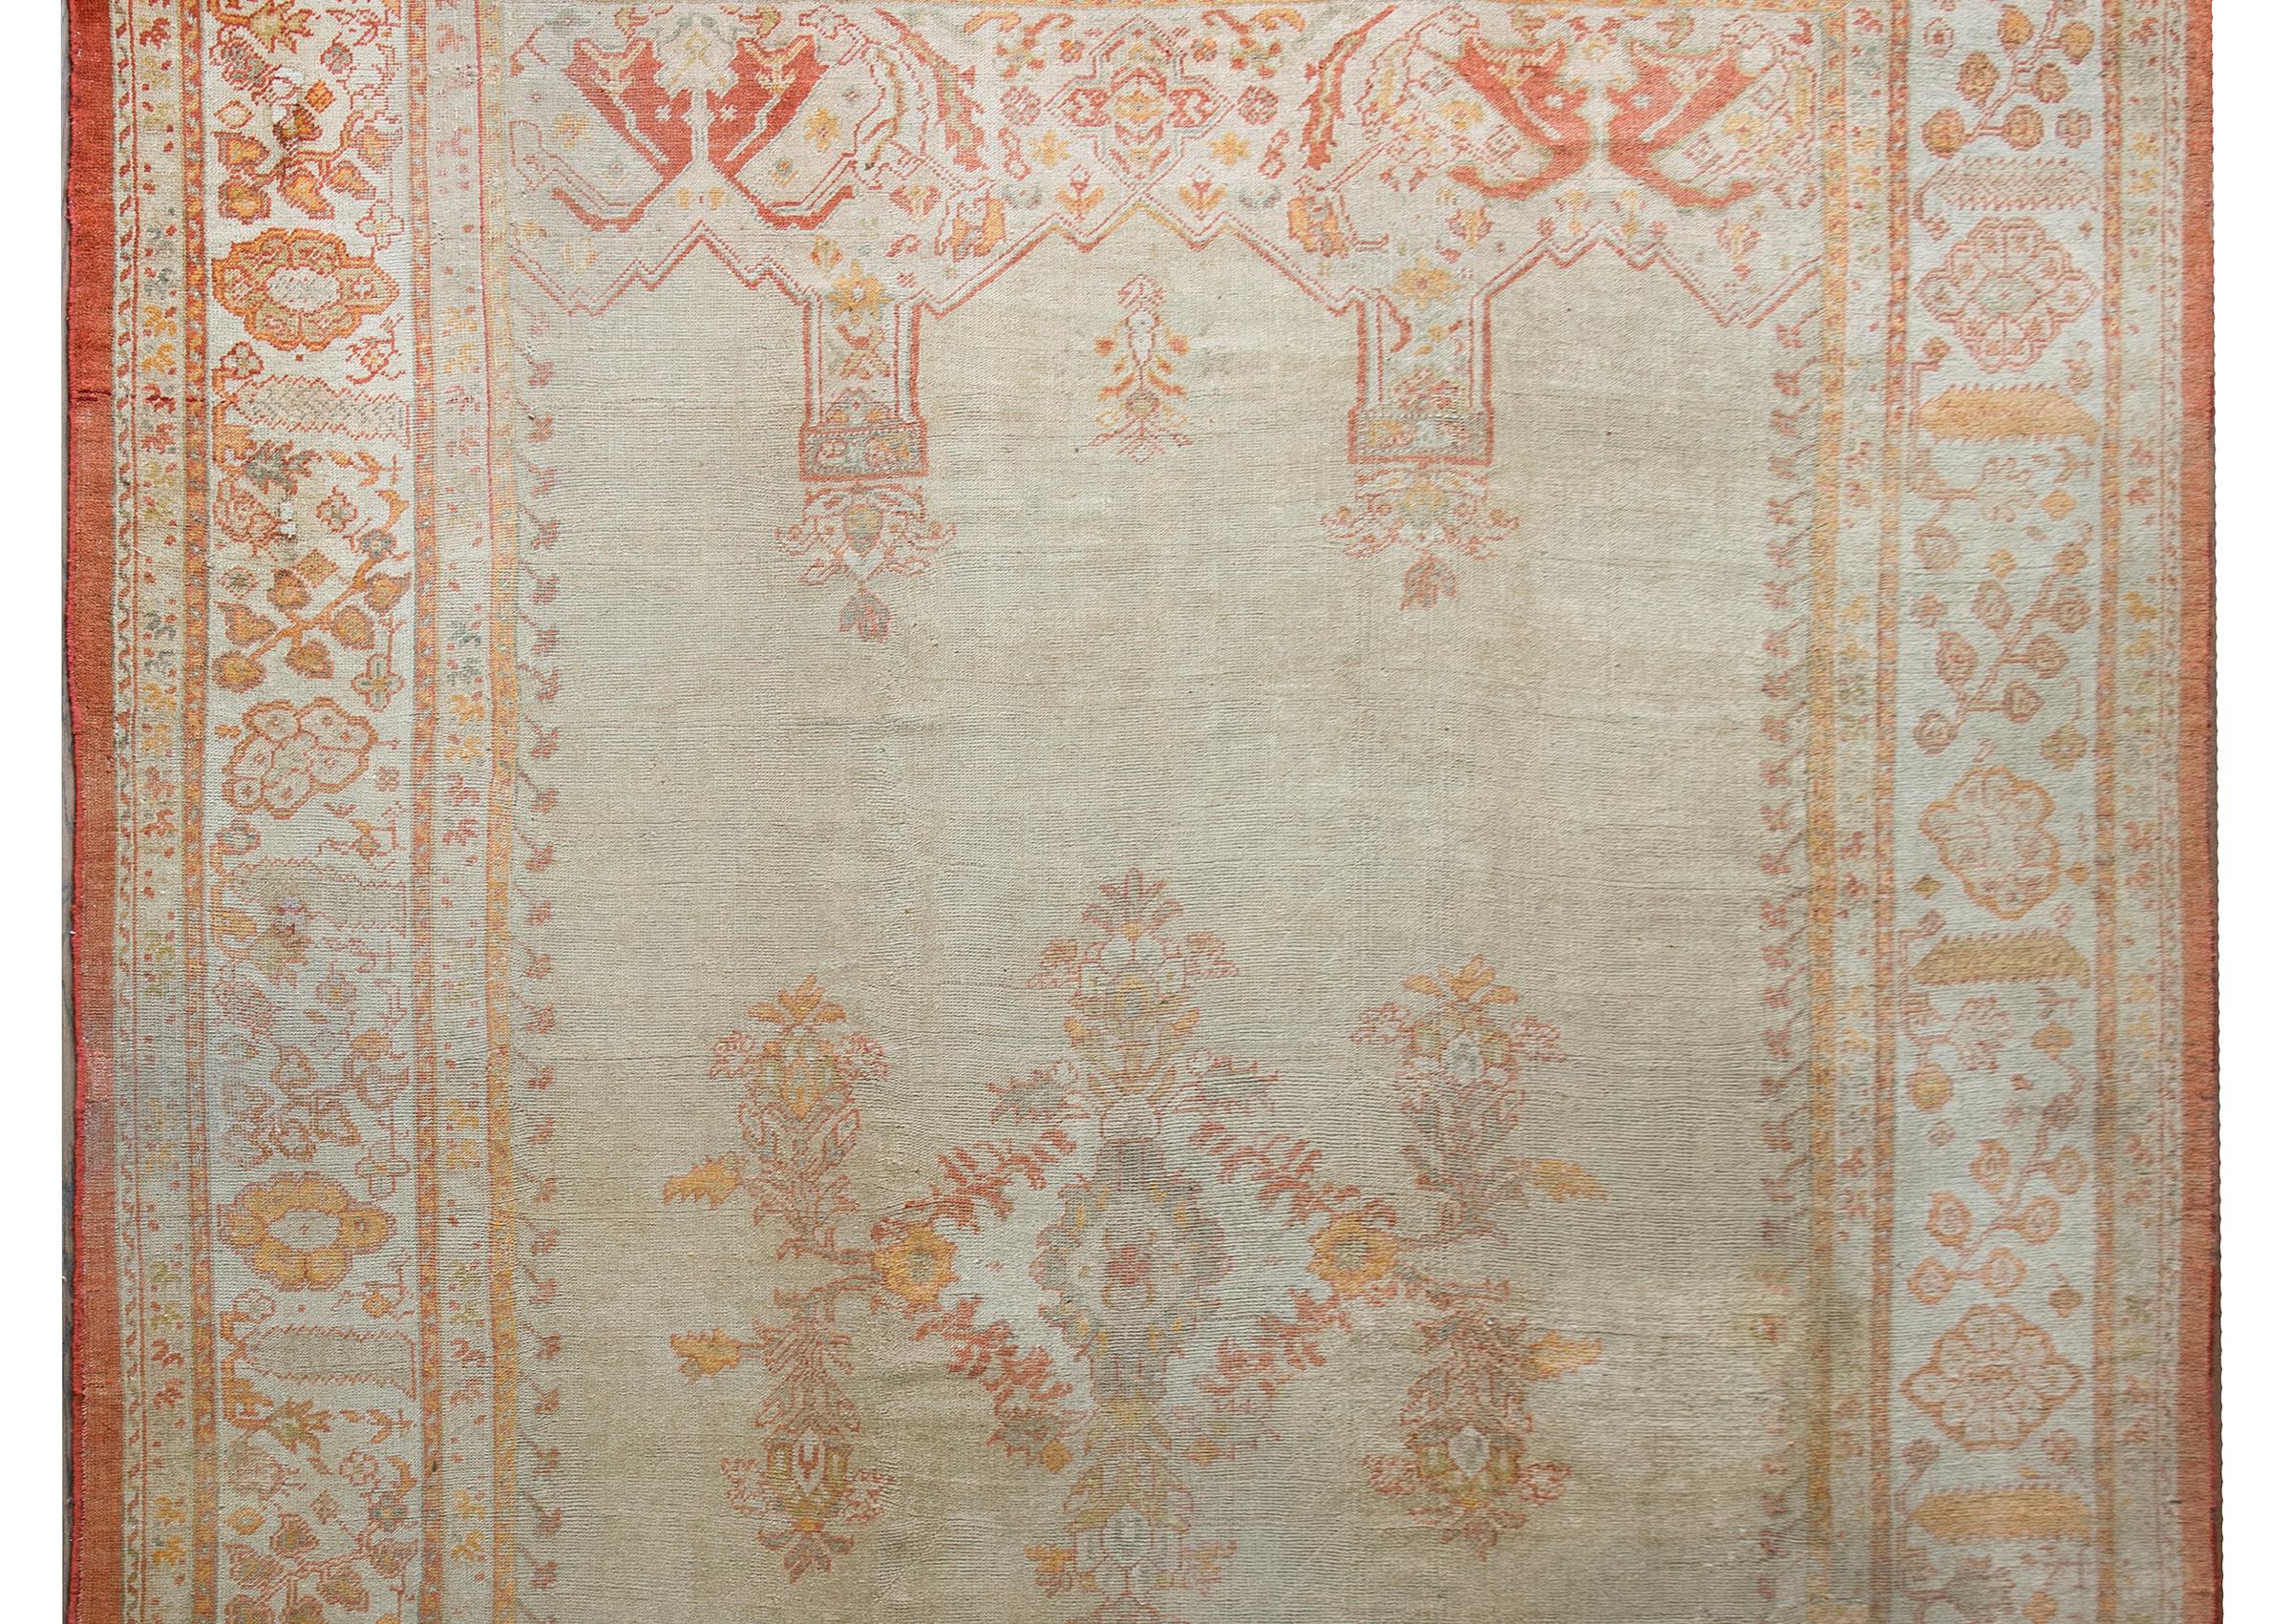 An exceptional and striking late 19th century Turkish Oushak rug with a quiet pattern with a simple floral medallion living amidst a solid cream colored field, and surrounded by an wonderfully wide border containing multiple floral and scrolling